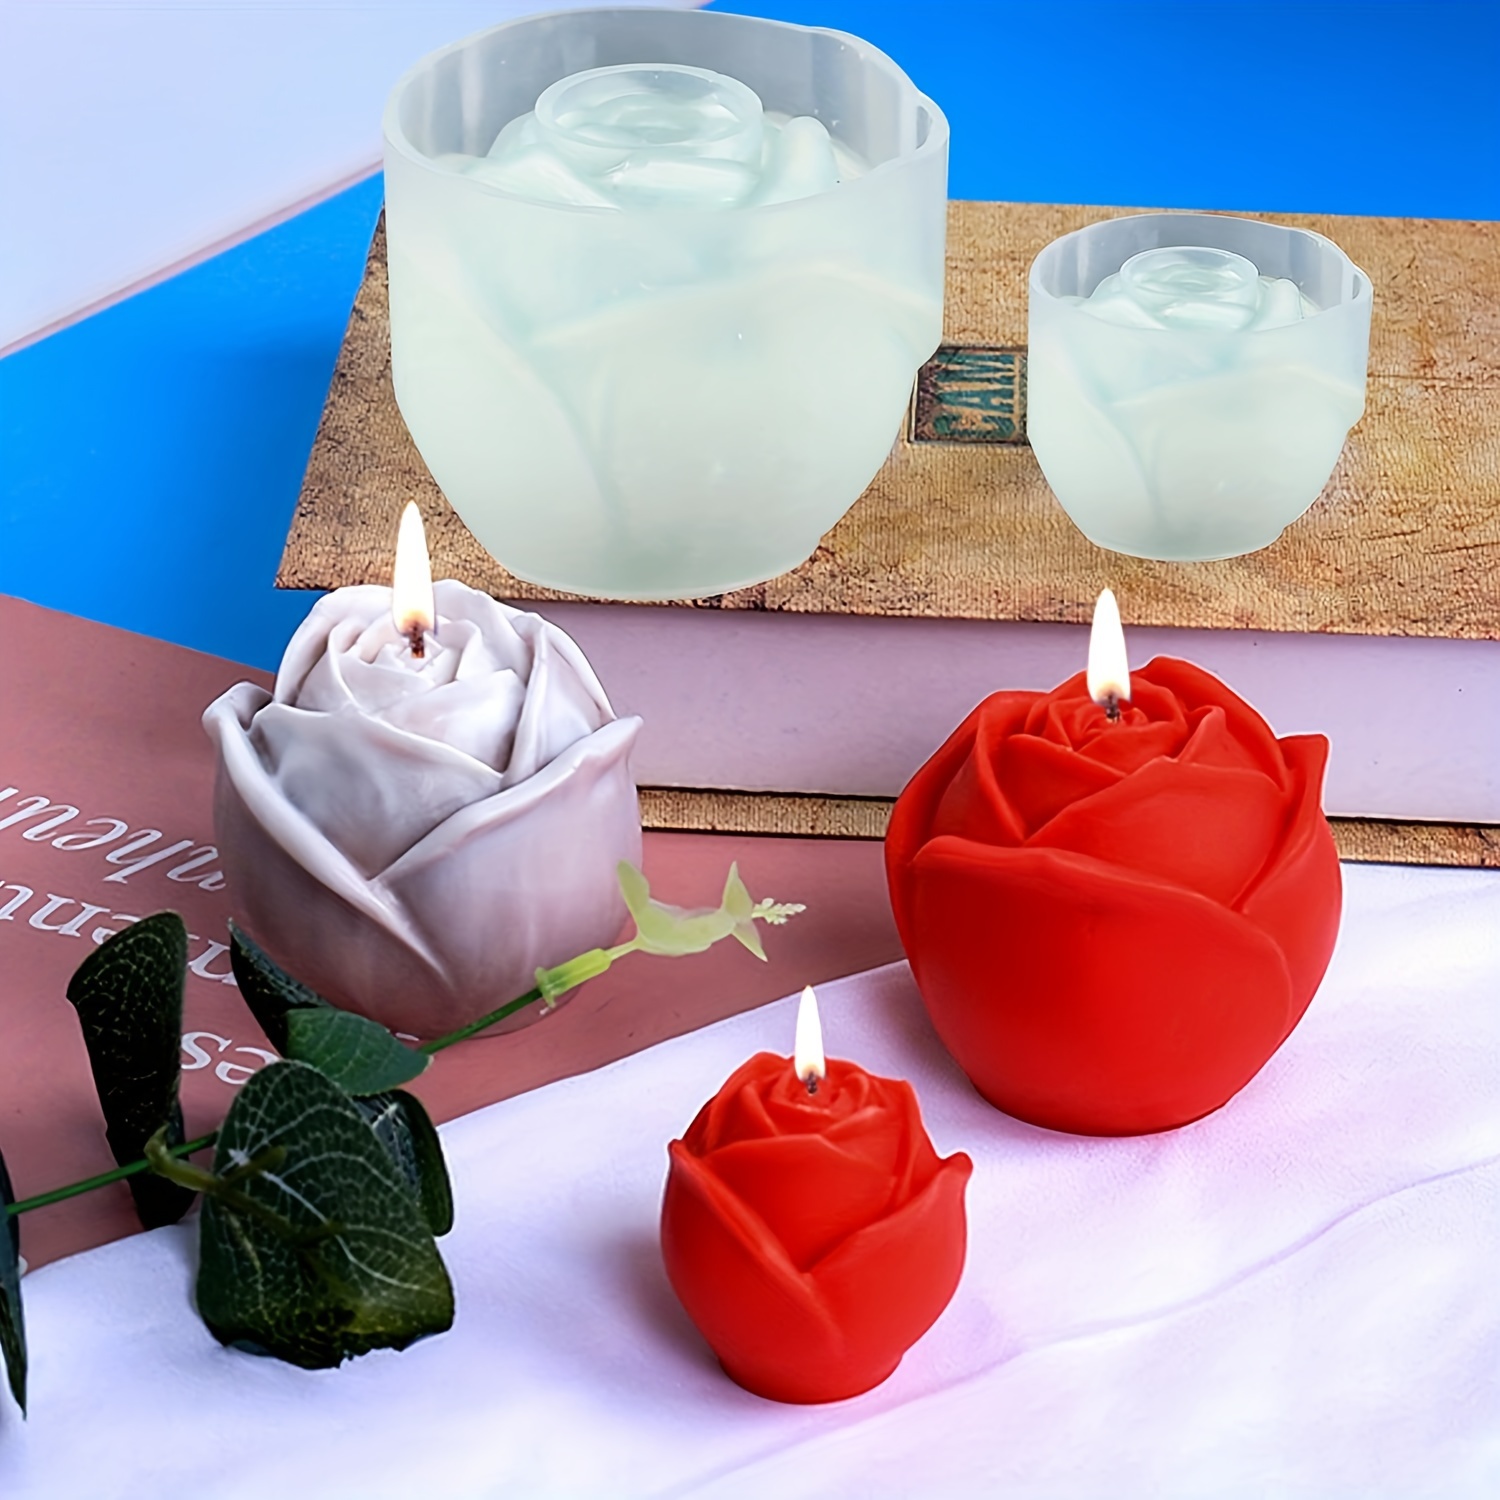 2pcs 3D Rose Silicone Molds, Valentine's Day Rose Candle Mold,Large And  Small Flower Rose Resin Mold ,Rose Ice Mold